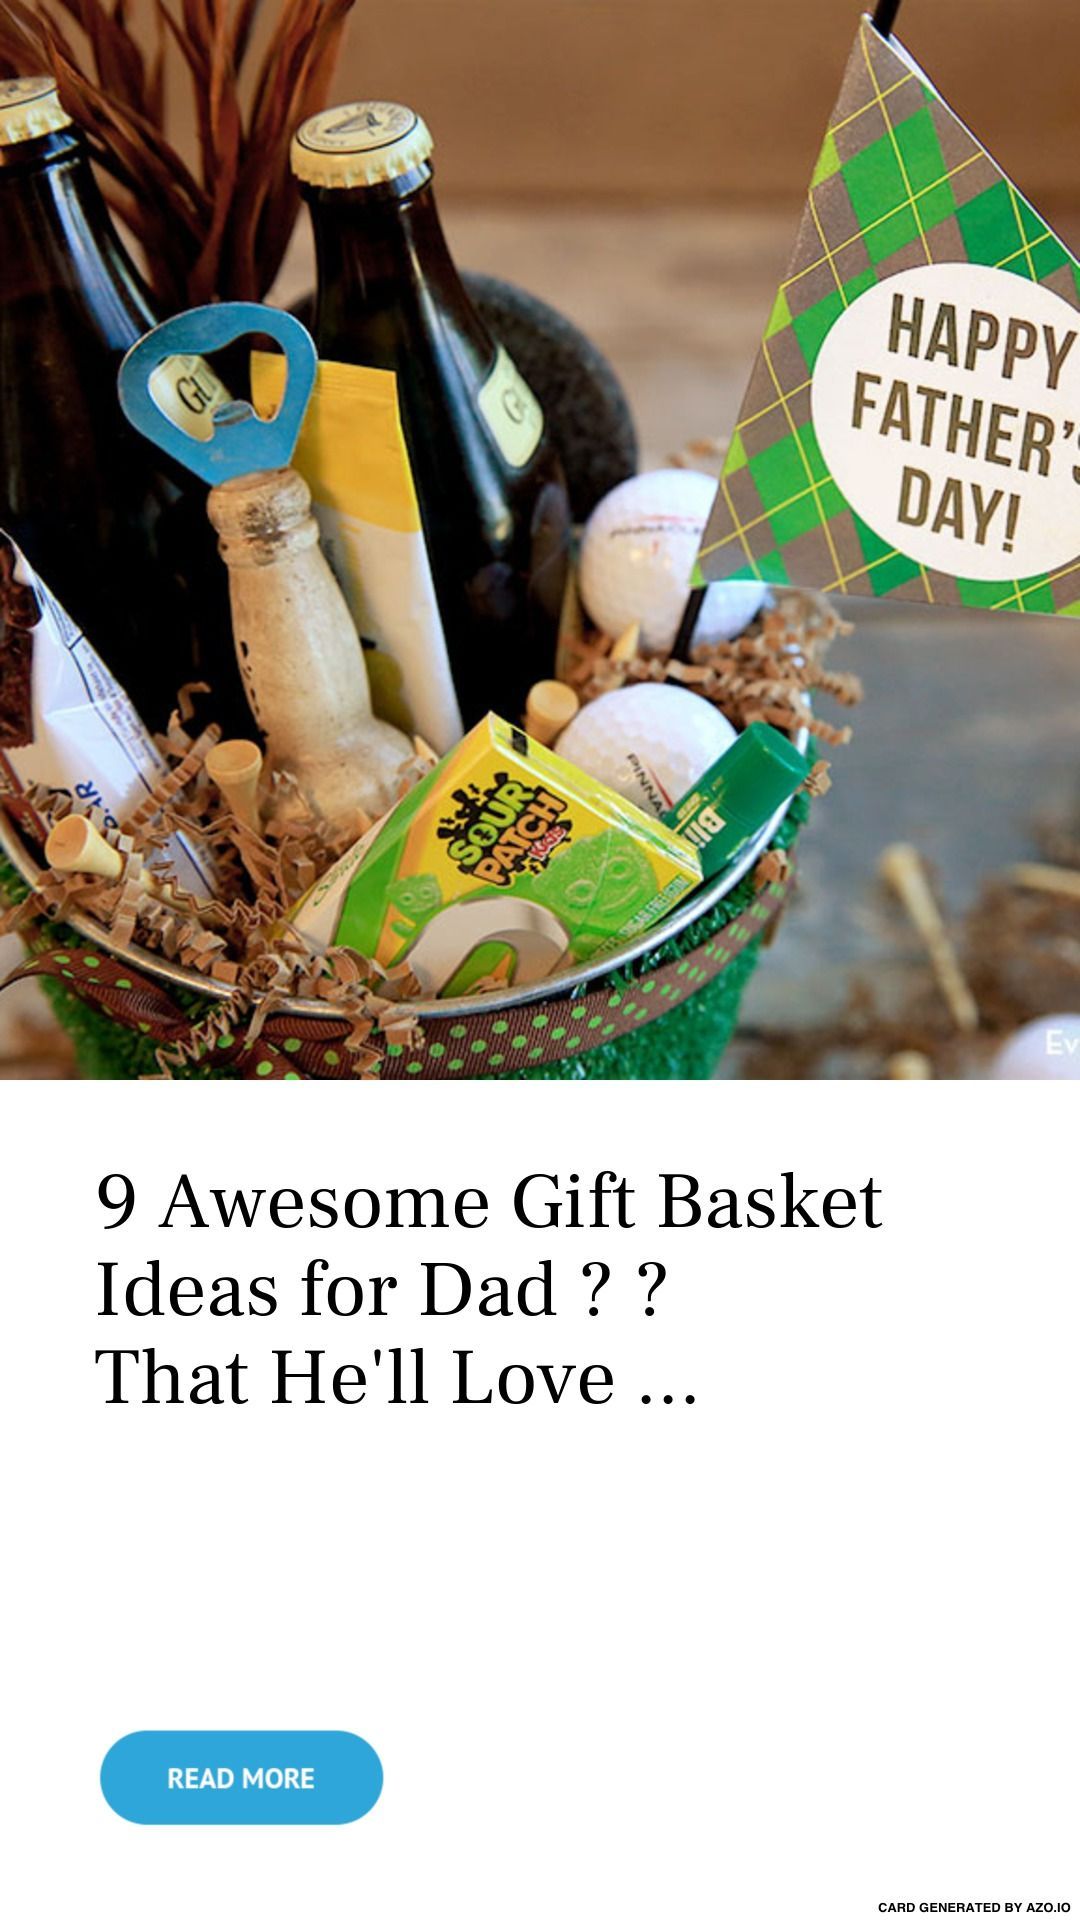 9 Awesome 😎 Gift 🎁 Basket Ideas 💡 for Dad 👨‍👧‍👦 That He'll Love 😍